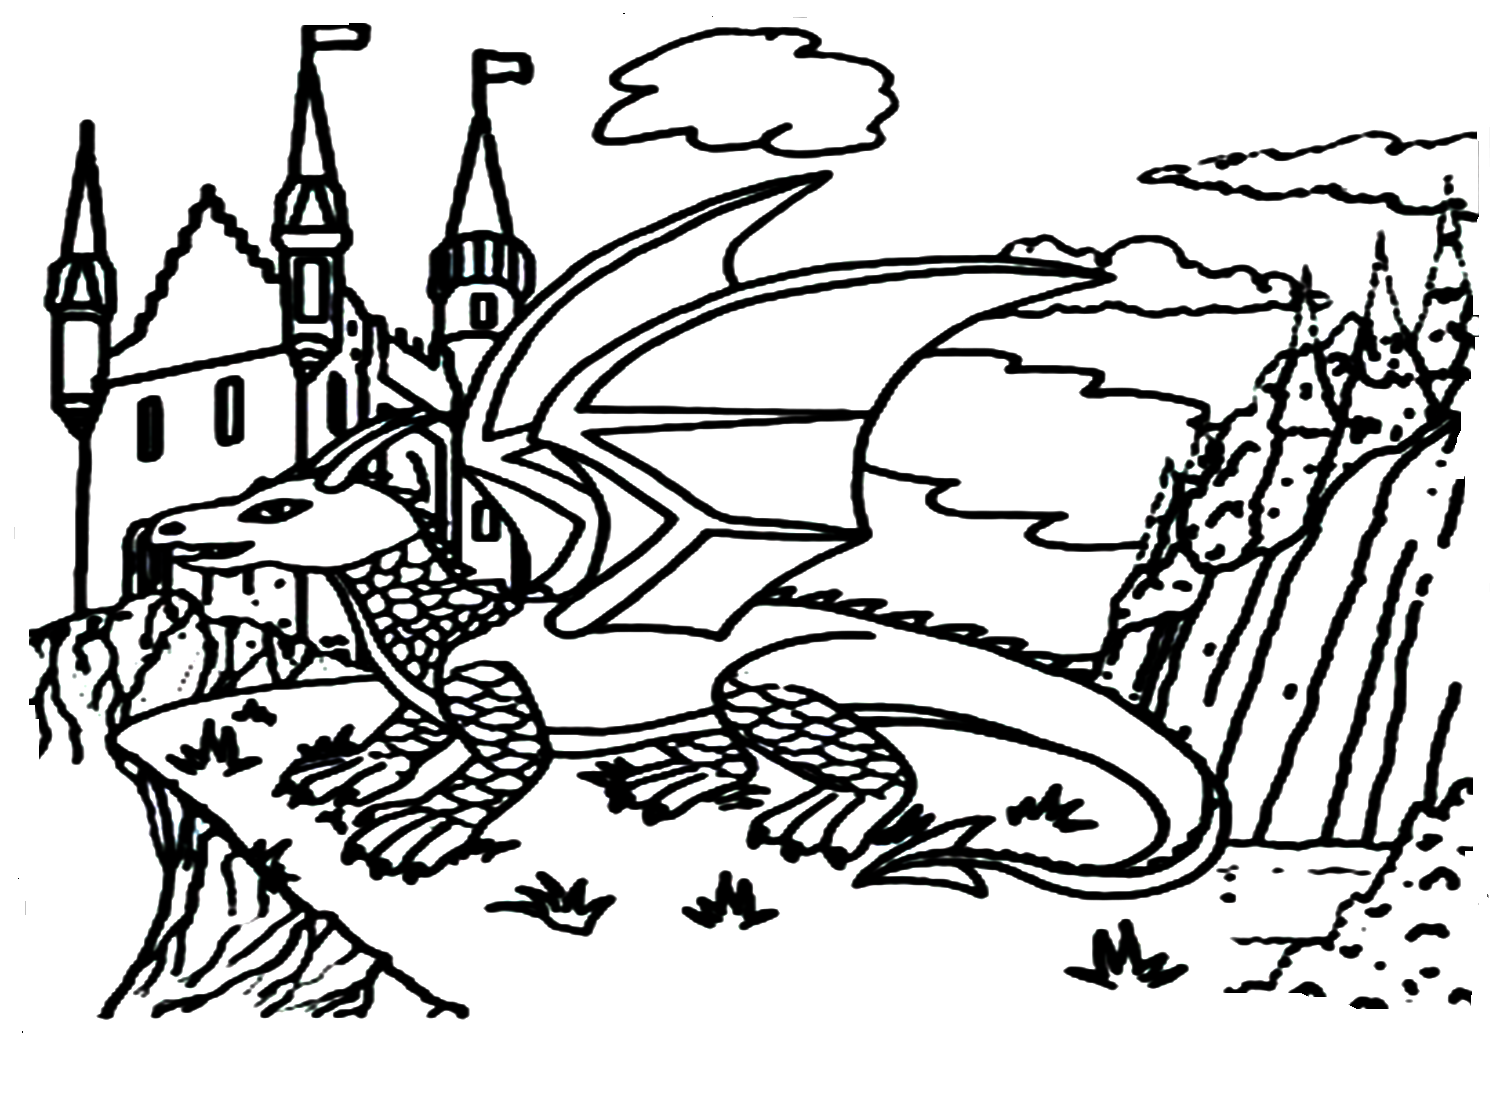 Puff The Magic Dragon Coloring Pages